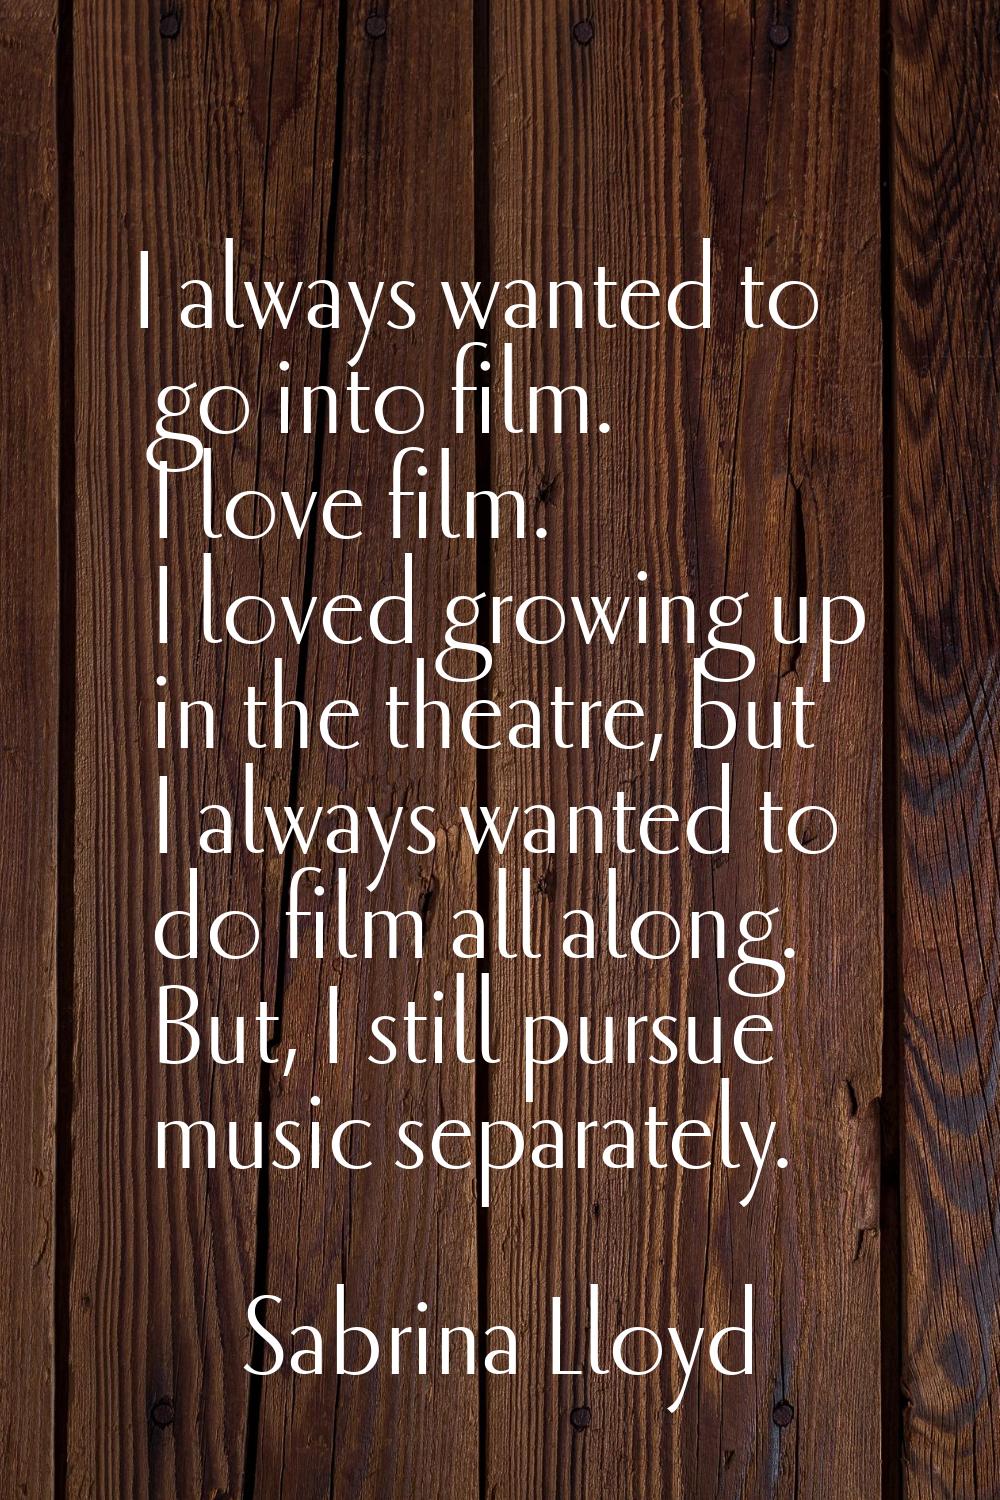 I always wanted to go into film. I love film. I loved growing up in the theatre, but I always wante